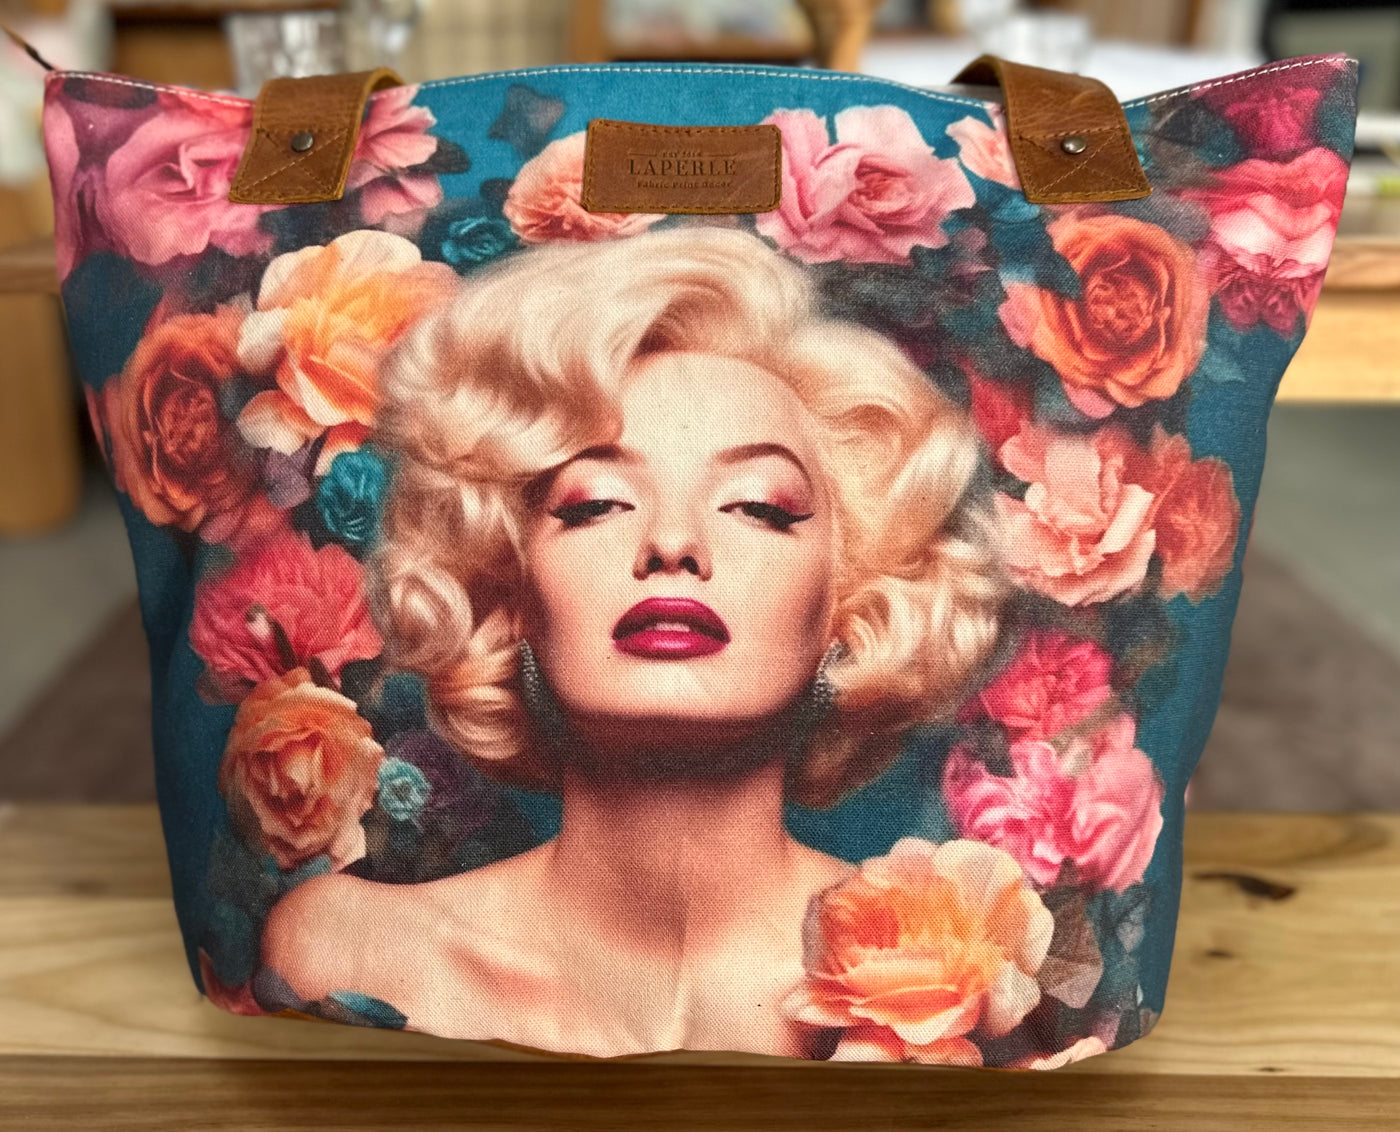 Large Leather bag with Painted Marilyn Monroe Design